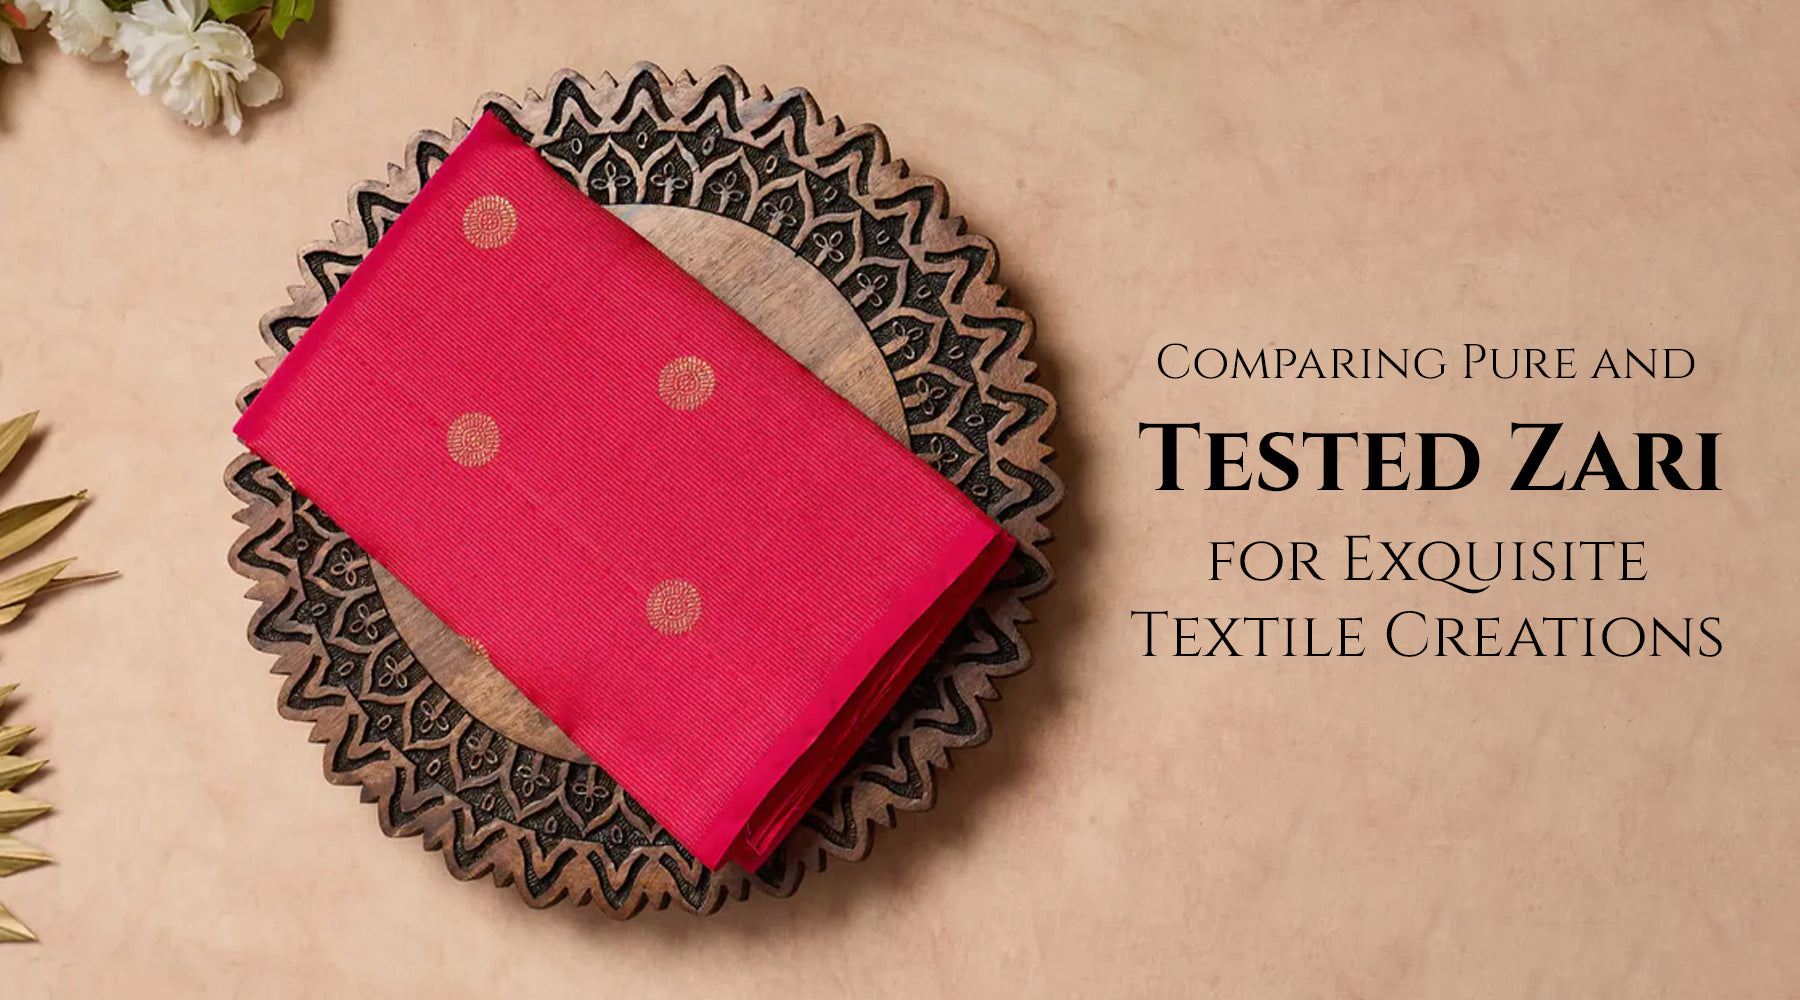 Comparing Pure and Tested Zari for Exquisite Textile Creations